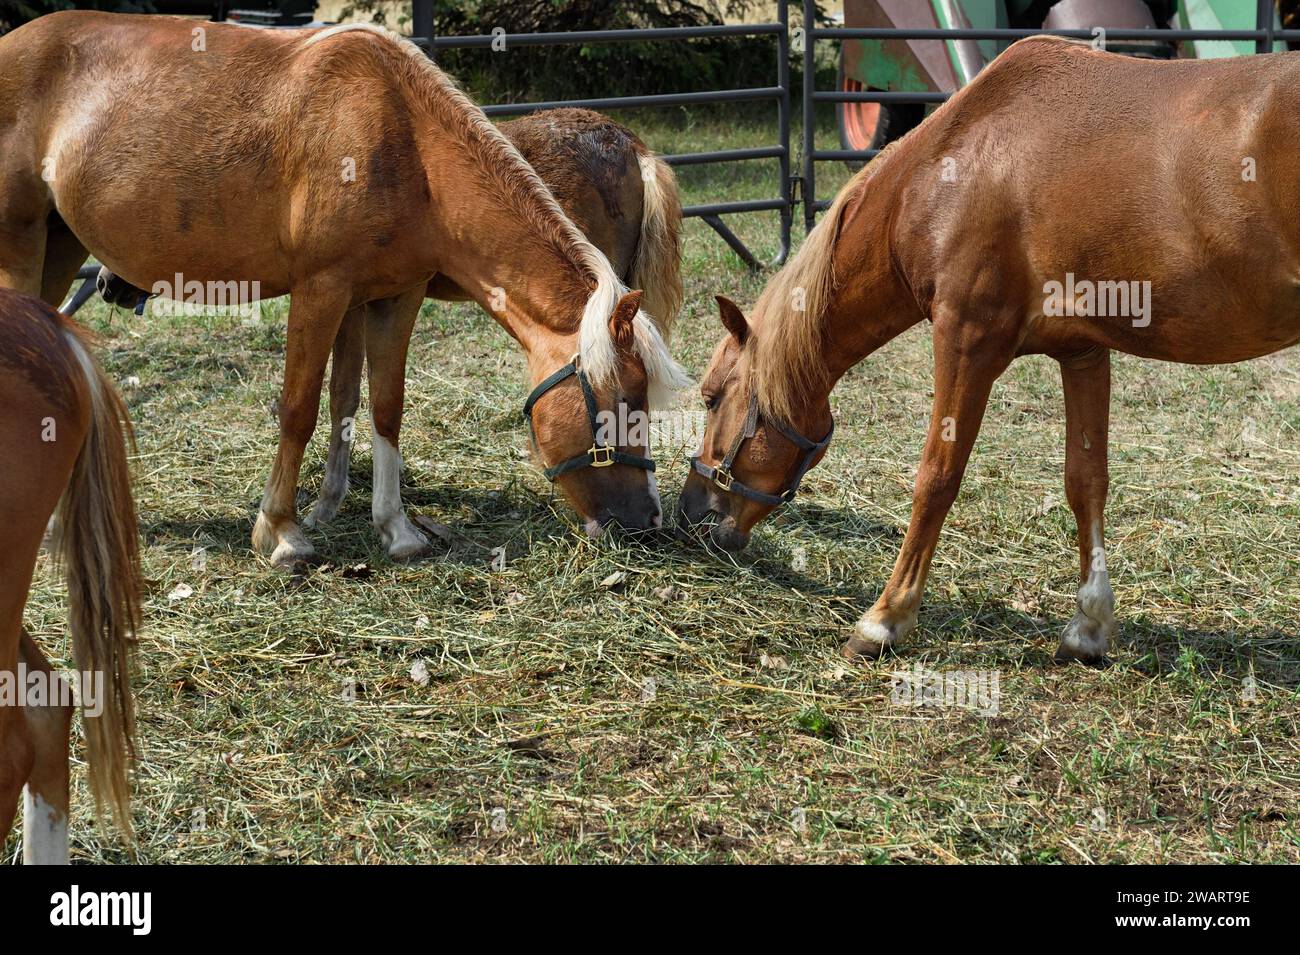 Horses in Corral Eating Straw Together - outside Stock Photo